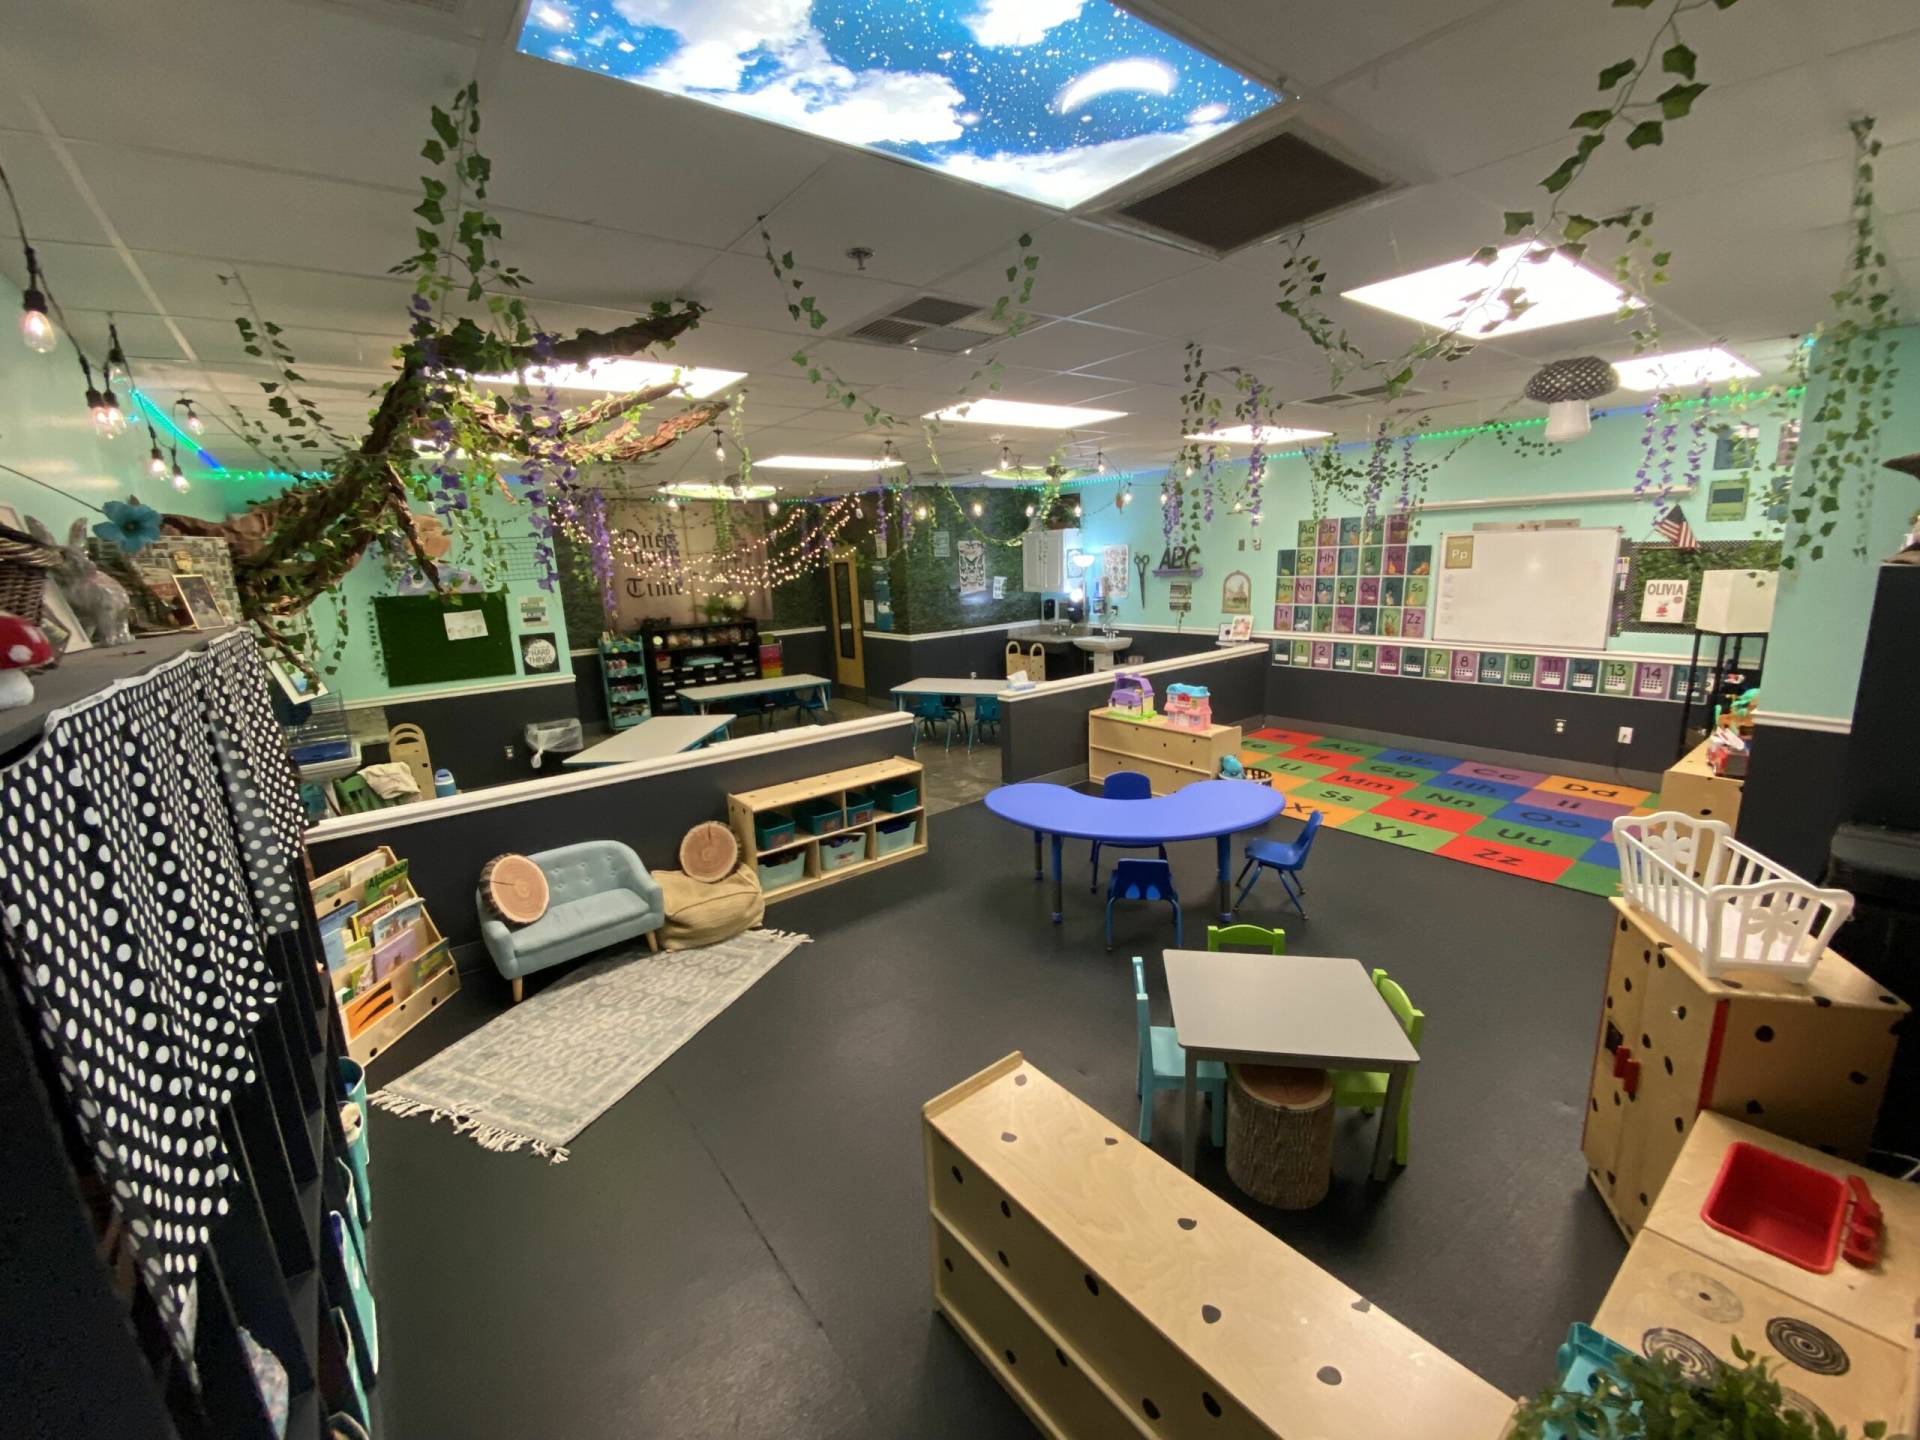 An inviting and vibrant preschool classroom with an imaginative play theme. The ceiling is adorned with strings of lights and decorative greenery, simulating an enchanted forest. The floor is covered with a multicolored alphabet carpet and various play areas. To the left, a cozy reading nook with a small blue sofa, bookshelf, and polka dot curtain invites quiet time. In the center, a blue circular table and a green square table provide spaces for group activities. The room's periphery features learning stations, including a whiteboard, a bulletin board with children's names, and a kitchen playset. An interactive corner with a crib and wooden play structures encourages imaginative play. The space is well-lit, with both fluorescent lighting and a starry sky painted ceiling, creating a magical learning atmosphere.